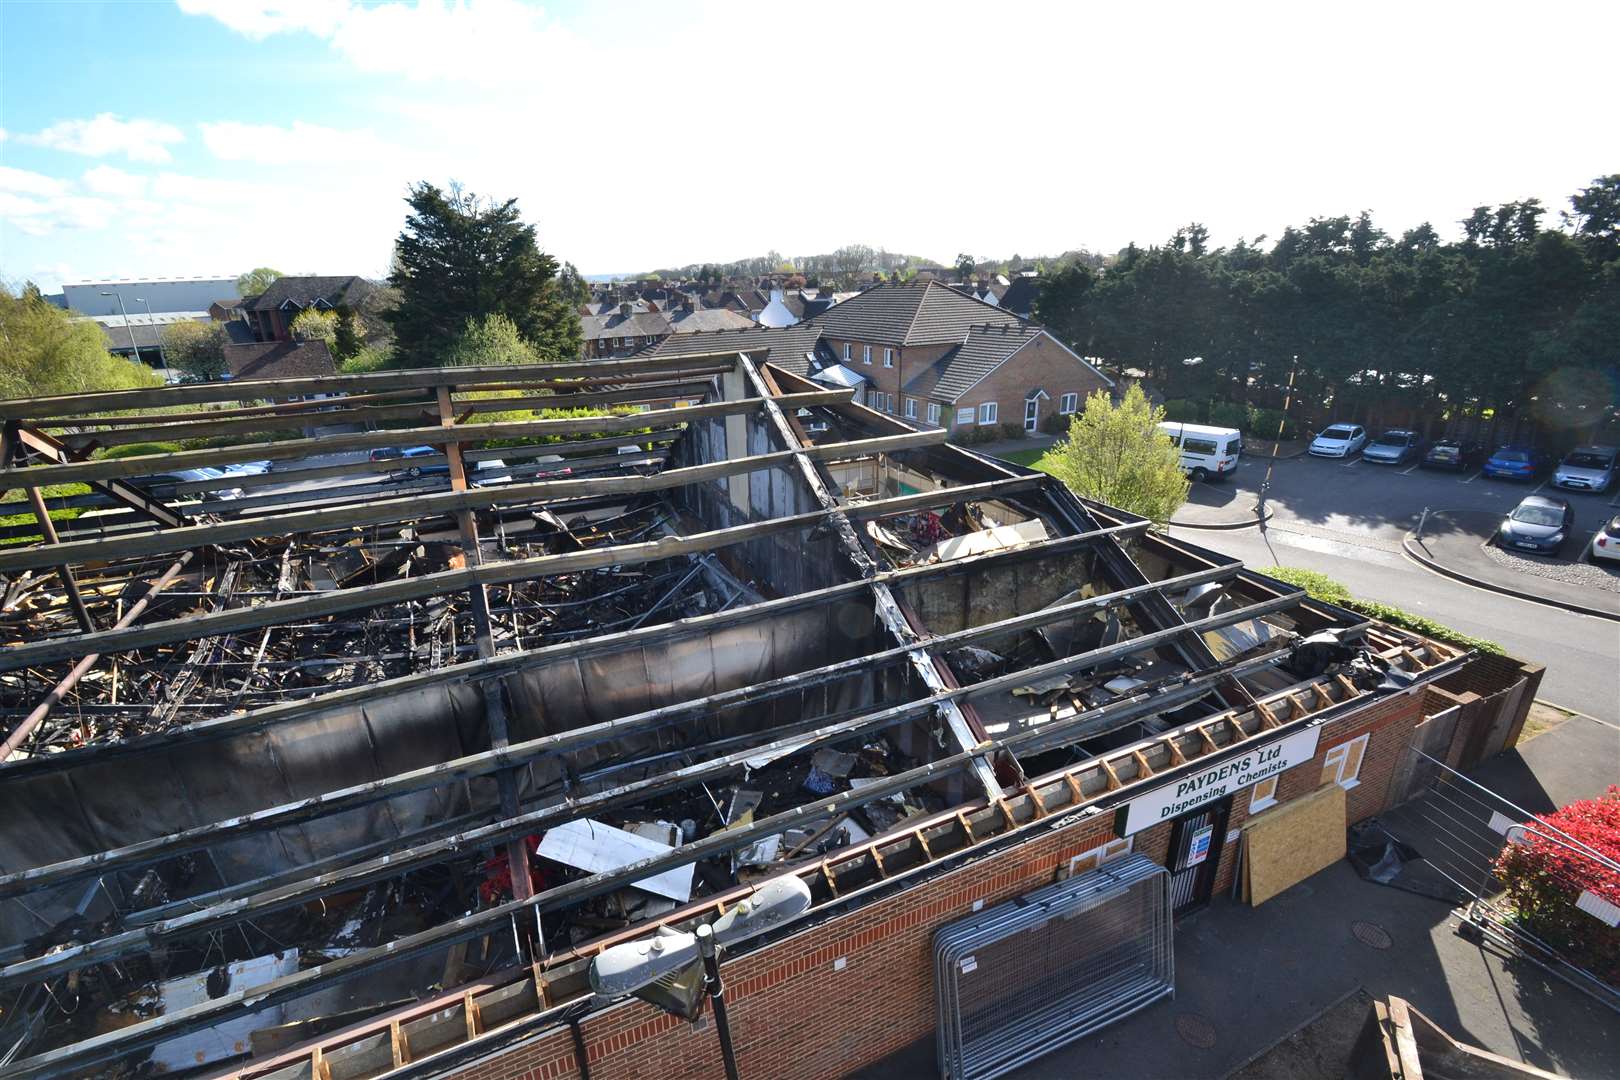 An aerial view shows the extent of the damage Picture: Steve Salter